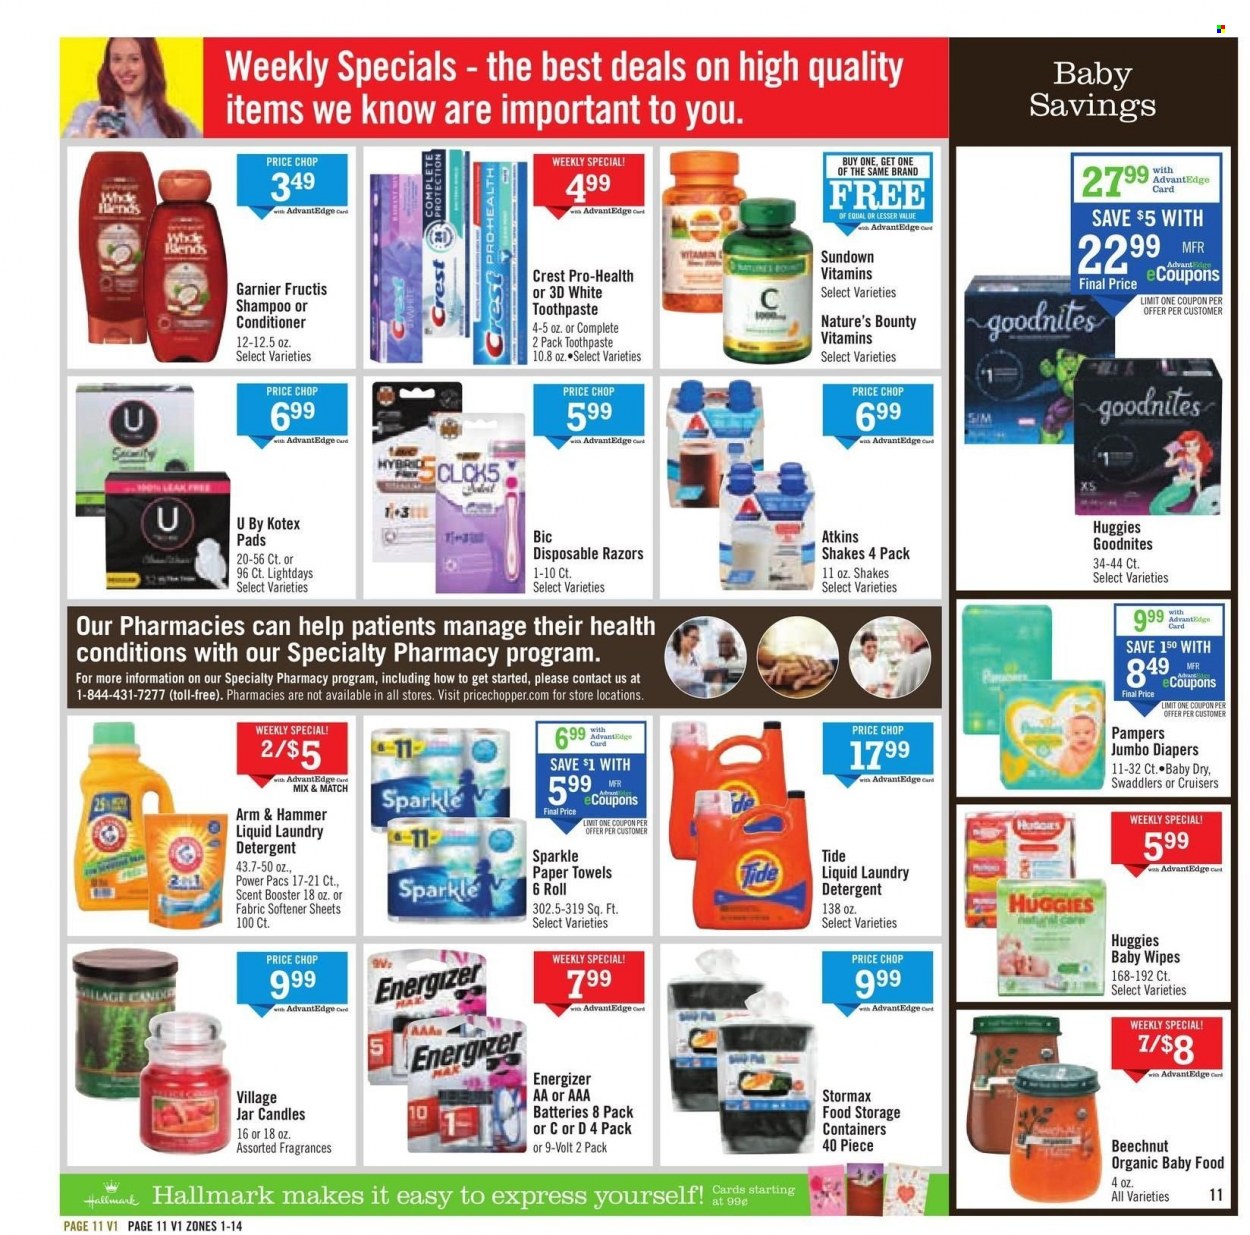 thumbnail - Price Chopper Flyer - 01/23/2022 - 01/29/2022 - Sales products - shake, ARM & HAMMER, organic baby food, wipes, Huggies, Pampers, baby wipes, nappies, kitchen towels, paper towels, detergent, Tide, fabric softener, laundry detergent, shampoo, toothpaste, Crest, Kotex, Kotex pads, Garnier, conditioner, Fructis, candle, Energizer, AAA batteries, Nature's Bounty. Page 11.